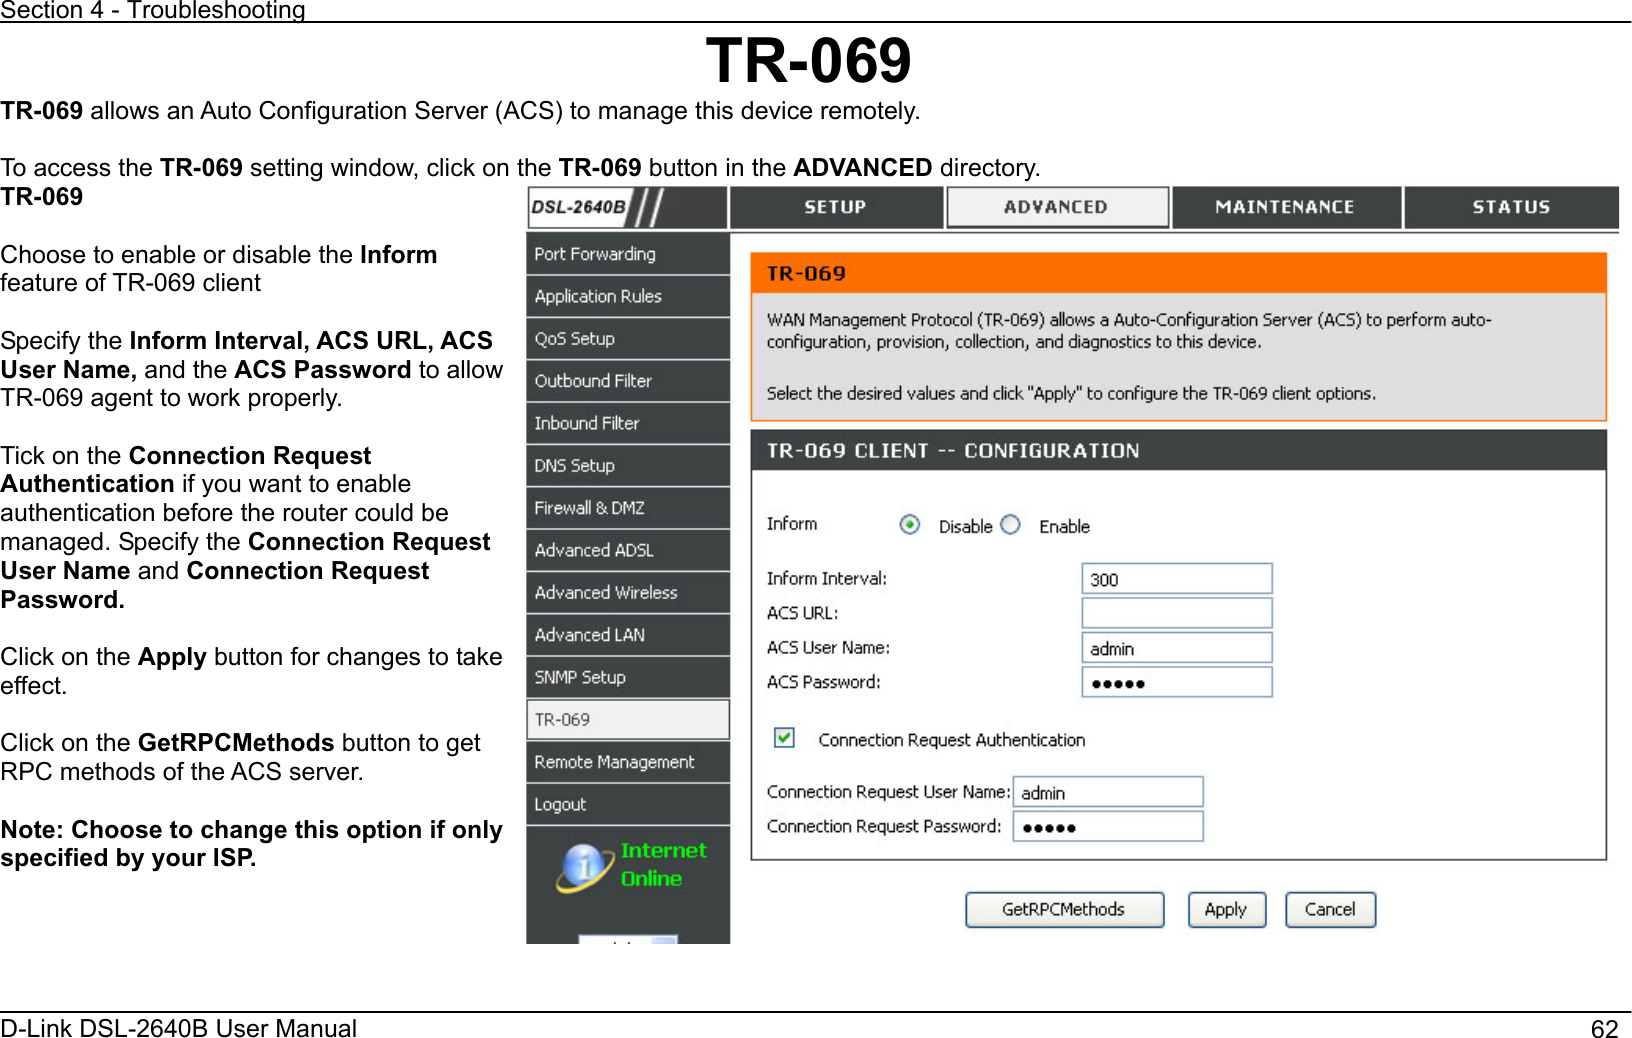 Section 4 - Troubleshooting D-Link DSL-2640B User Manual                                       62TR-069TR-069 allows an Auto Configuration Server (ACS) to manage this device remotely. To access the TR-069 setting window, click on the TR-069 button in the ADVANCED directory. TR-069Choose to enable or disable the Informfeature of TR-069 client Specify the Inform Interval, ACS URL, ACS User Name, and the ACS Password to allow TR-069 agent to work properly. Tick on the Connection Request Authentication if you want to enable authentication before the router could be managed. Specify the Connection Request User Name and Connection Request Password. Click on the Apply button for changes to take effect. Click on the GetRPCMethods button to get RPC methods of the ACS server. Note: Choose to change this option if only specified by your ISP.